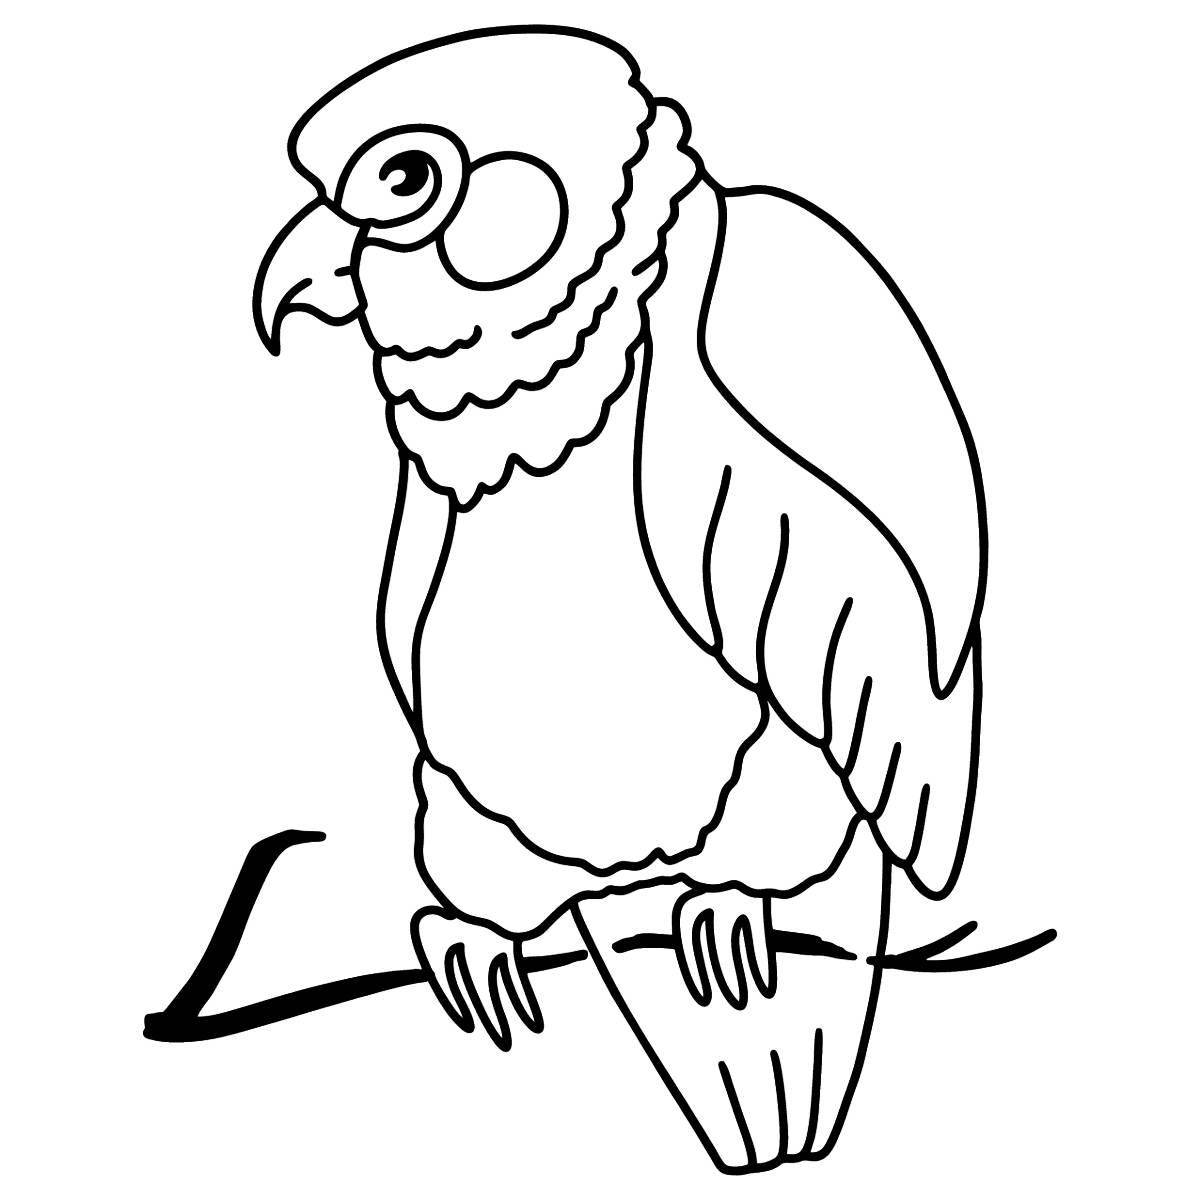 A fun parrot coloring book for 3-4 year olds